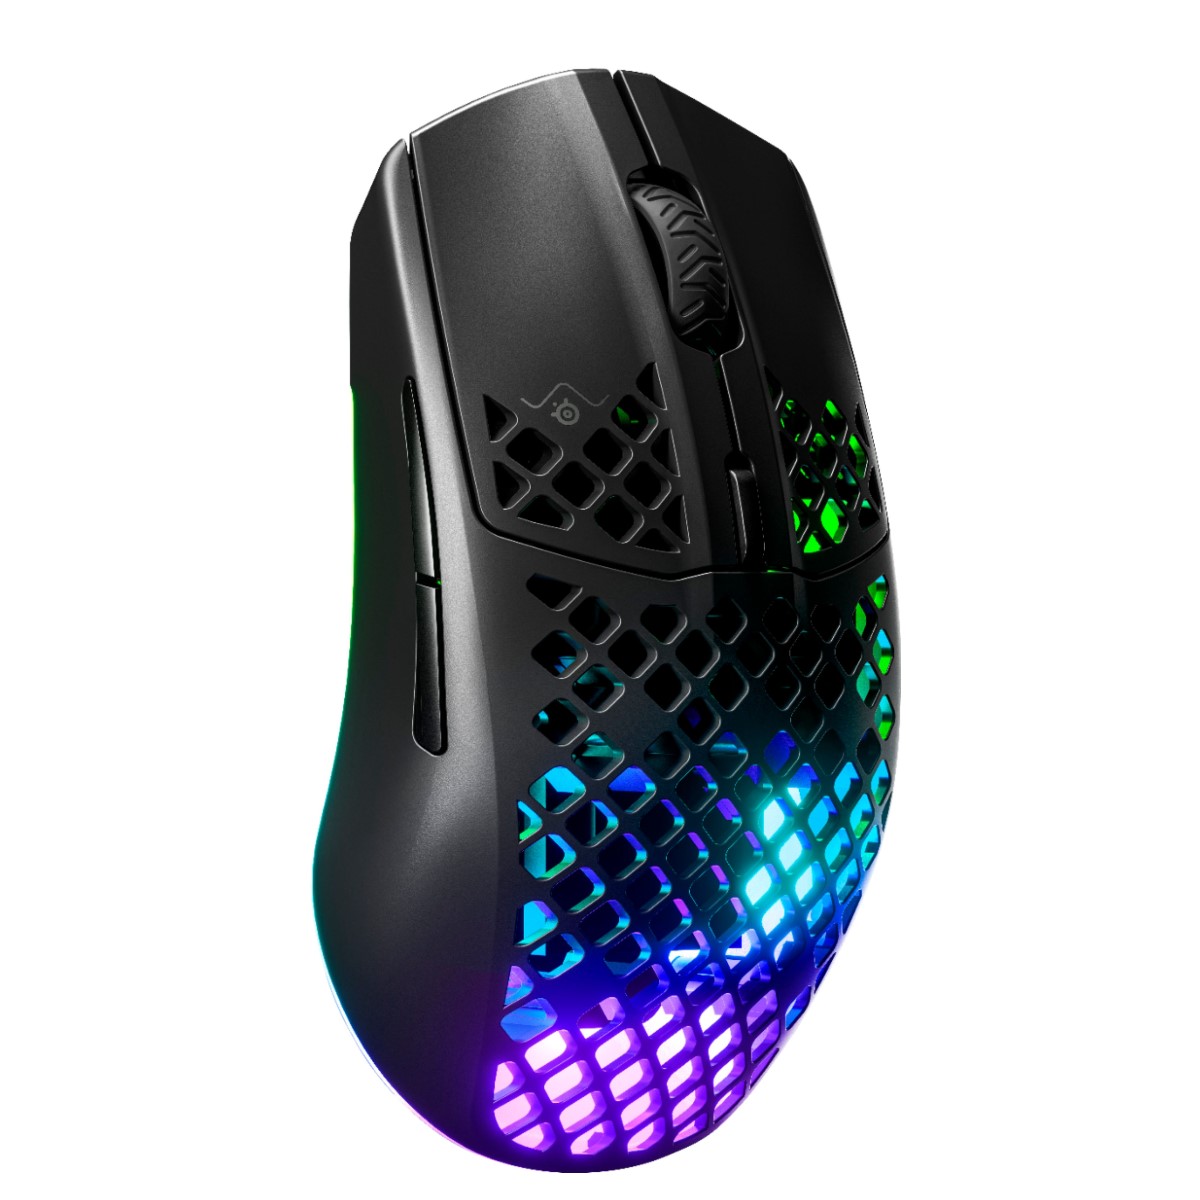 3 Gamer Clones Mouse Wireless Steelseries - Periféricos Aerox y